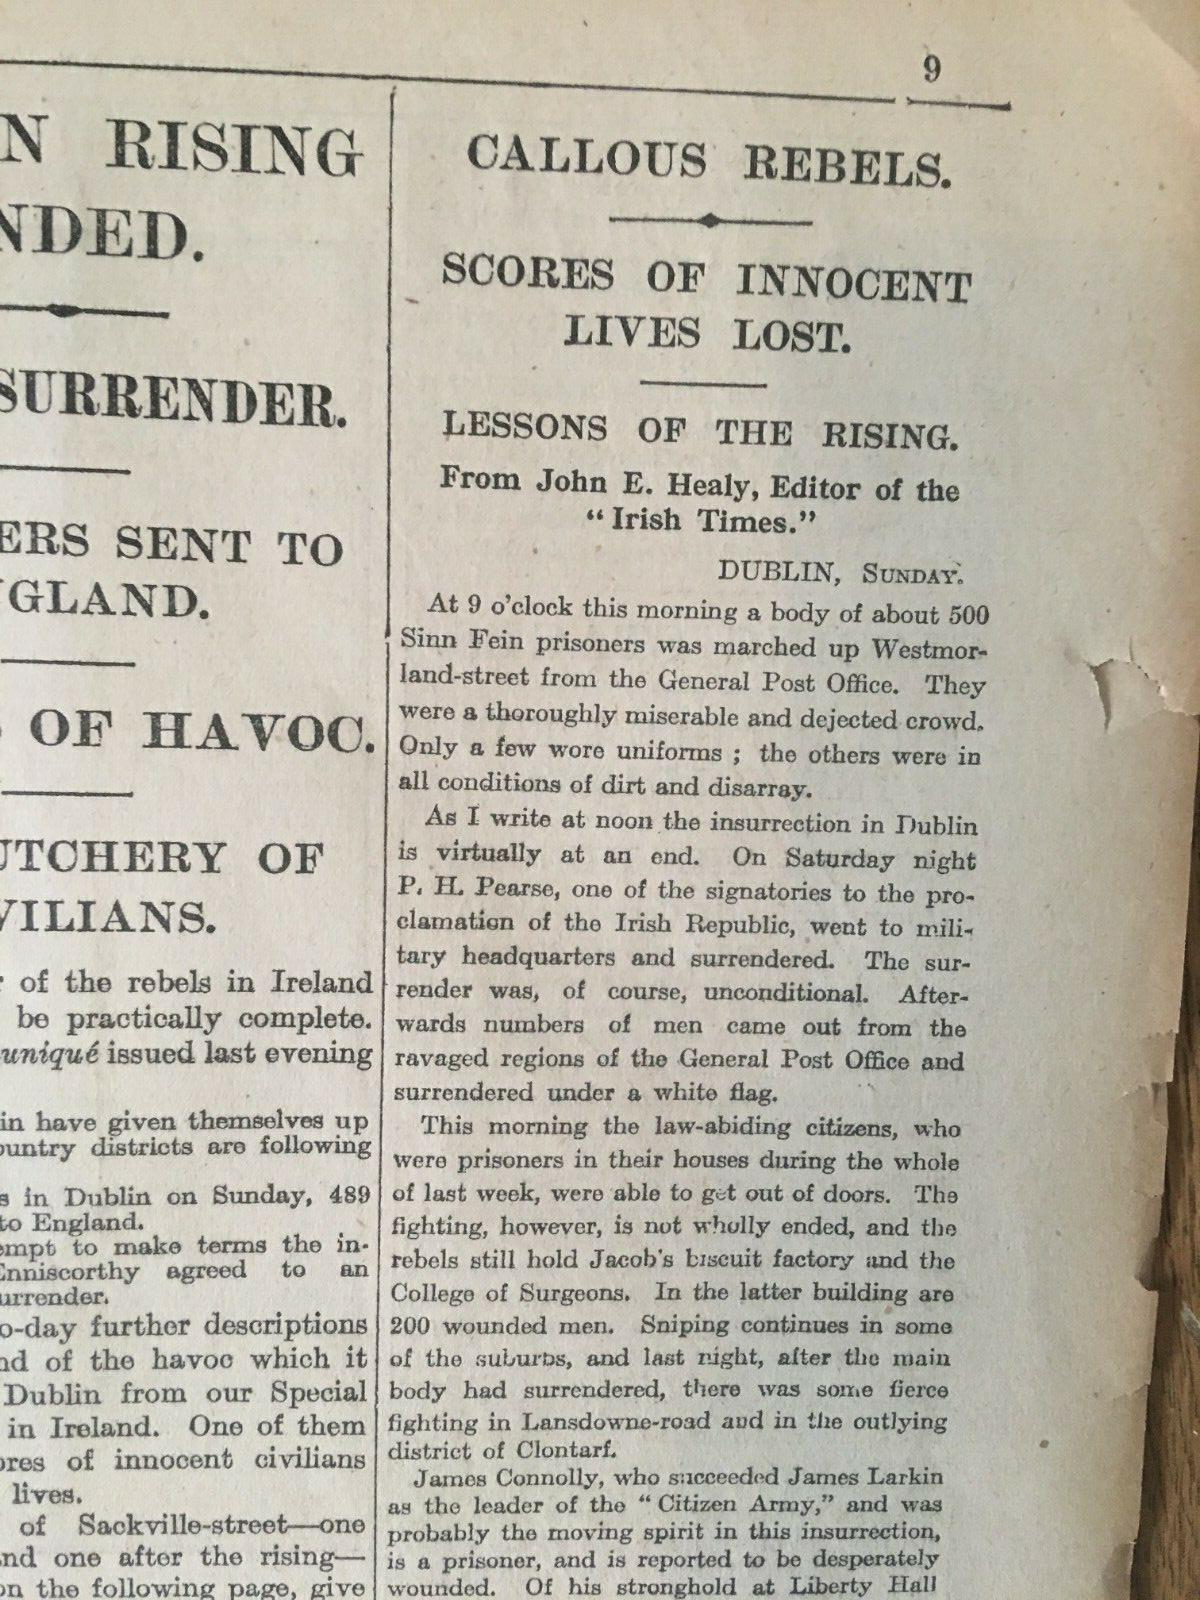 Easter Rising Rebellion 1916 Original Complete Newspaper 2nd May Images & Reports - Image 3 of 12